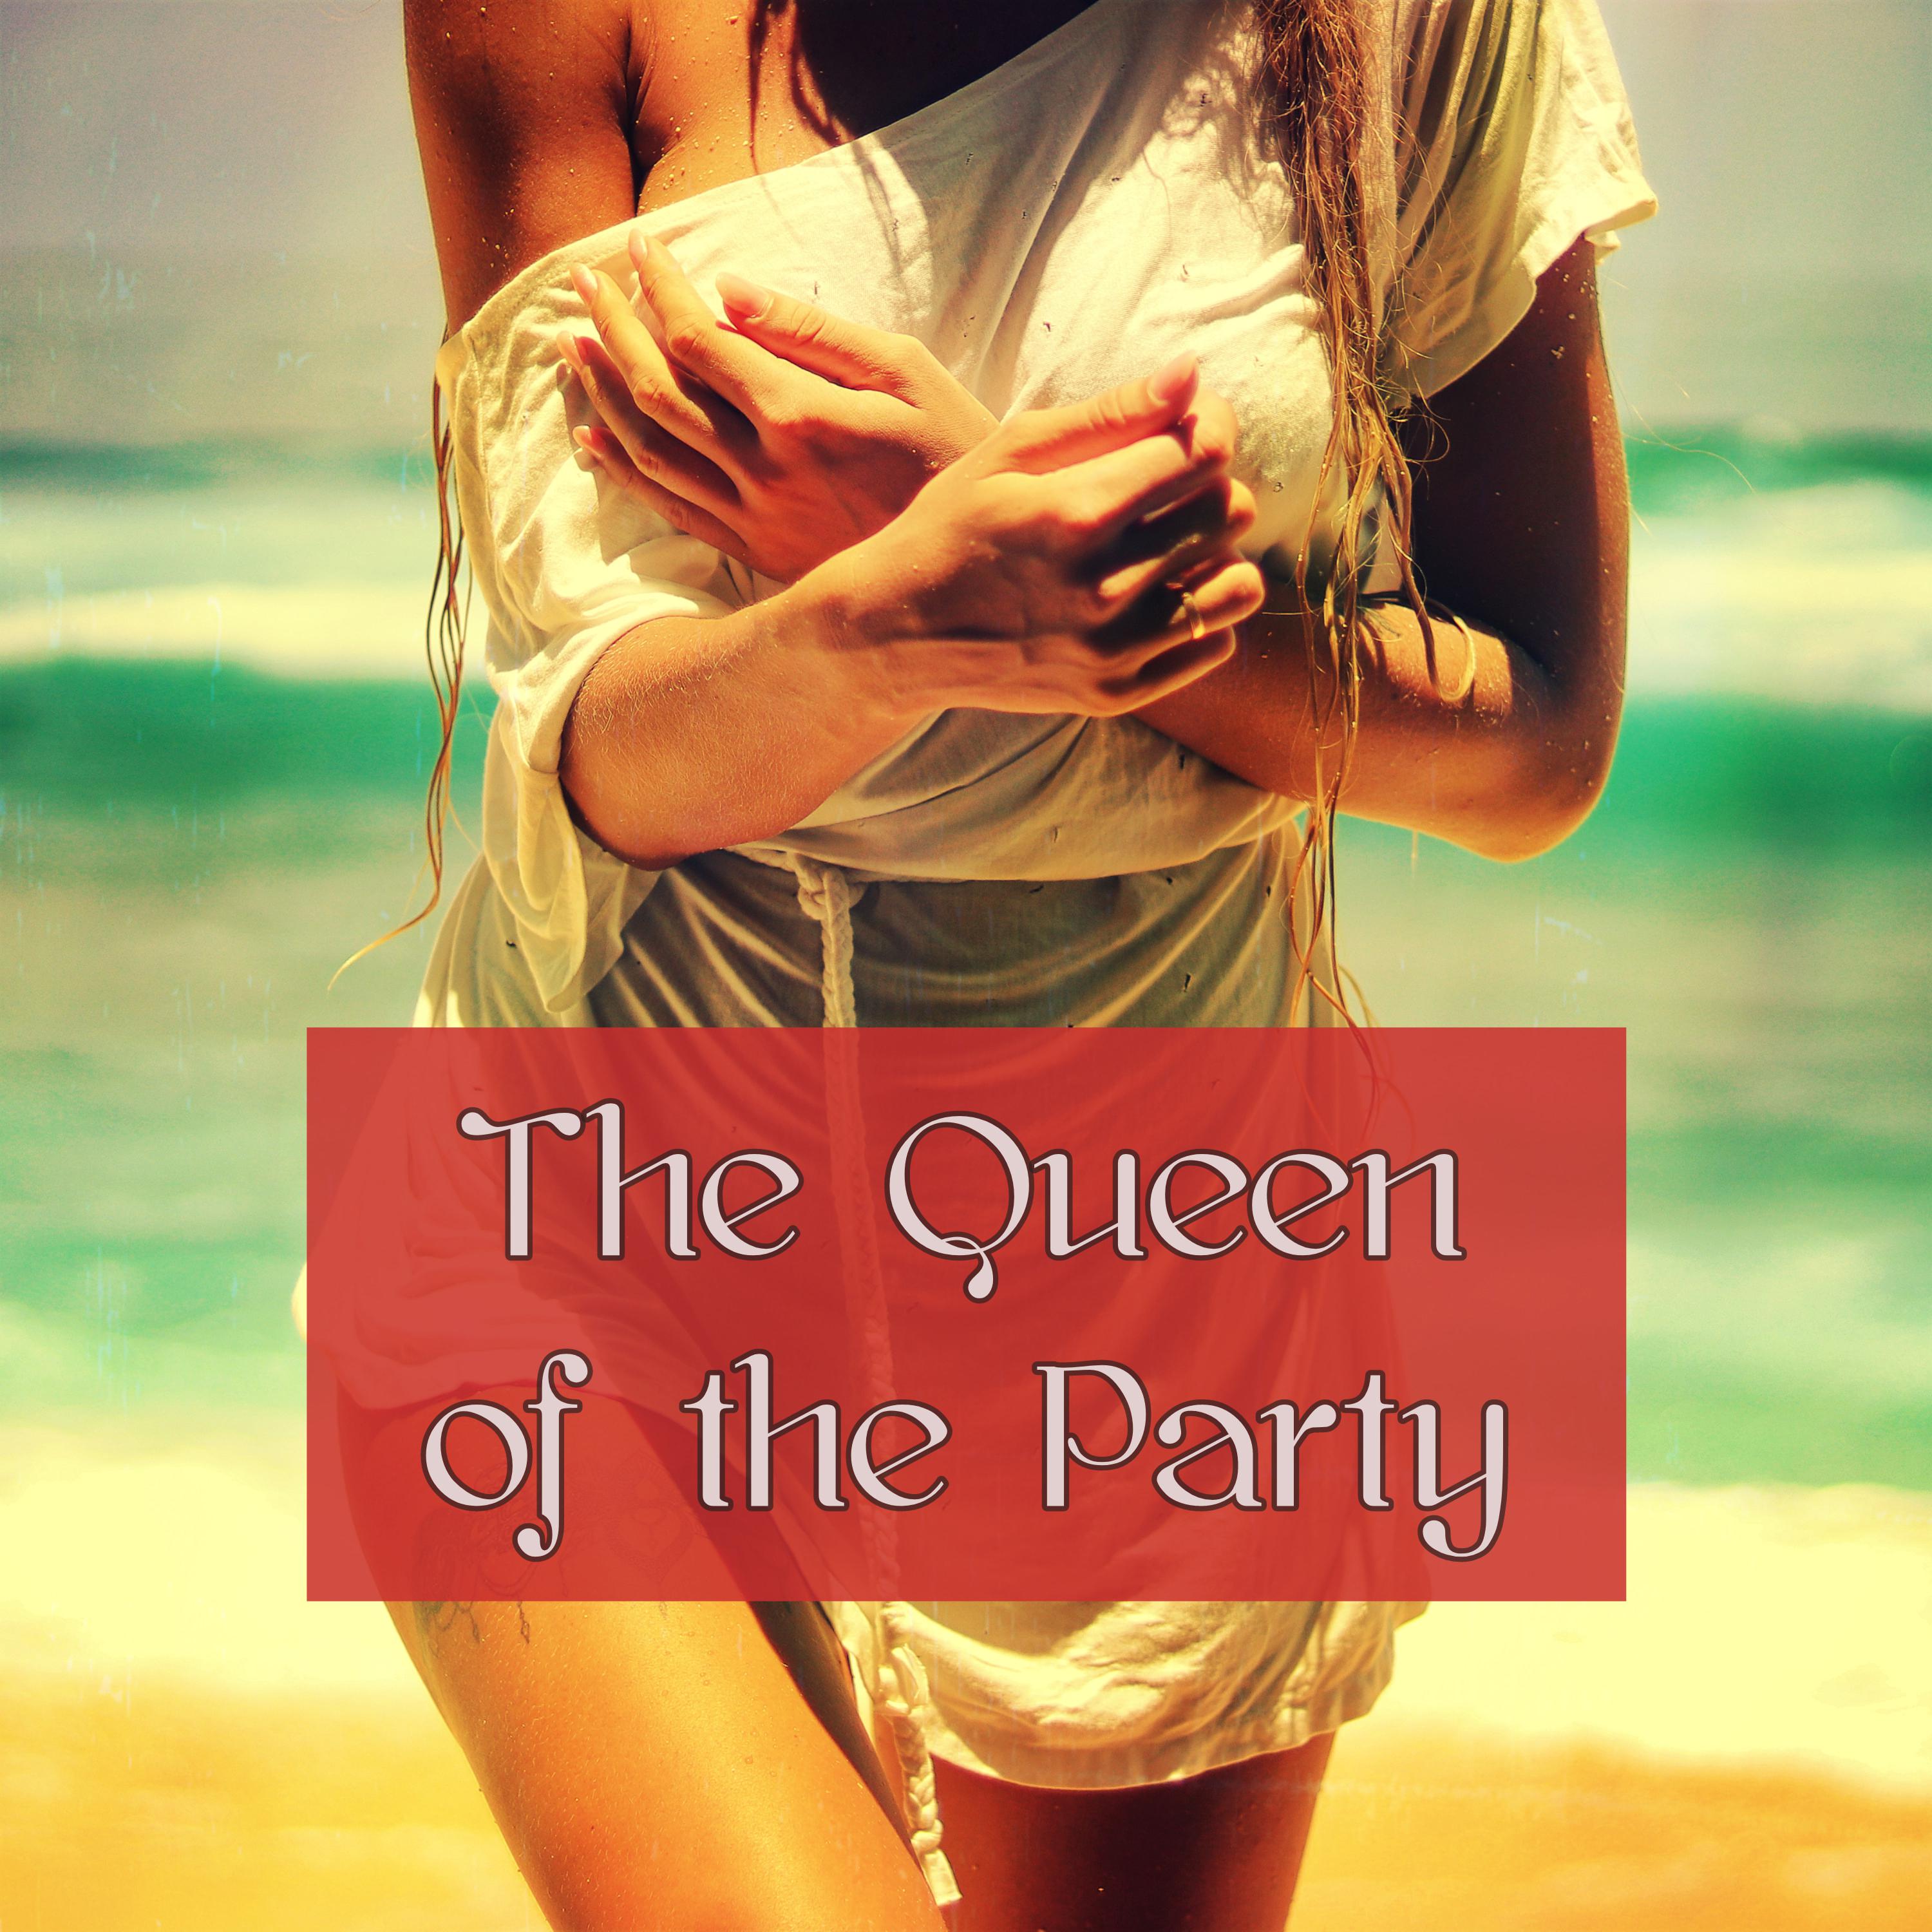 The Queen of the Party  Electronic Party Songs for ' n' Funky Night